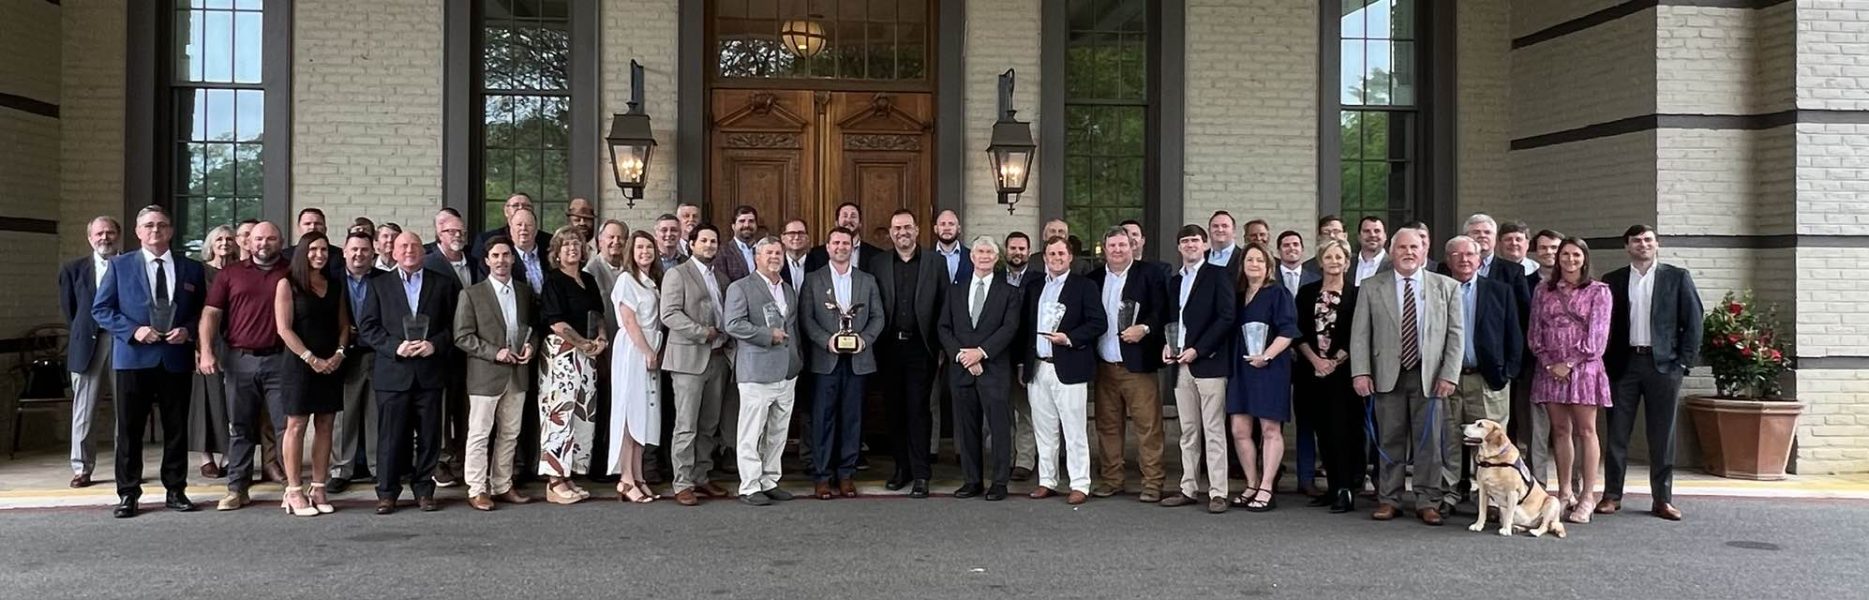 AGC MOBILE SECTION PRESENTS SAFETY AWARDS AT ANNUAL EVENT